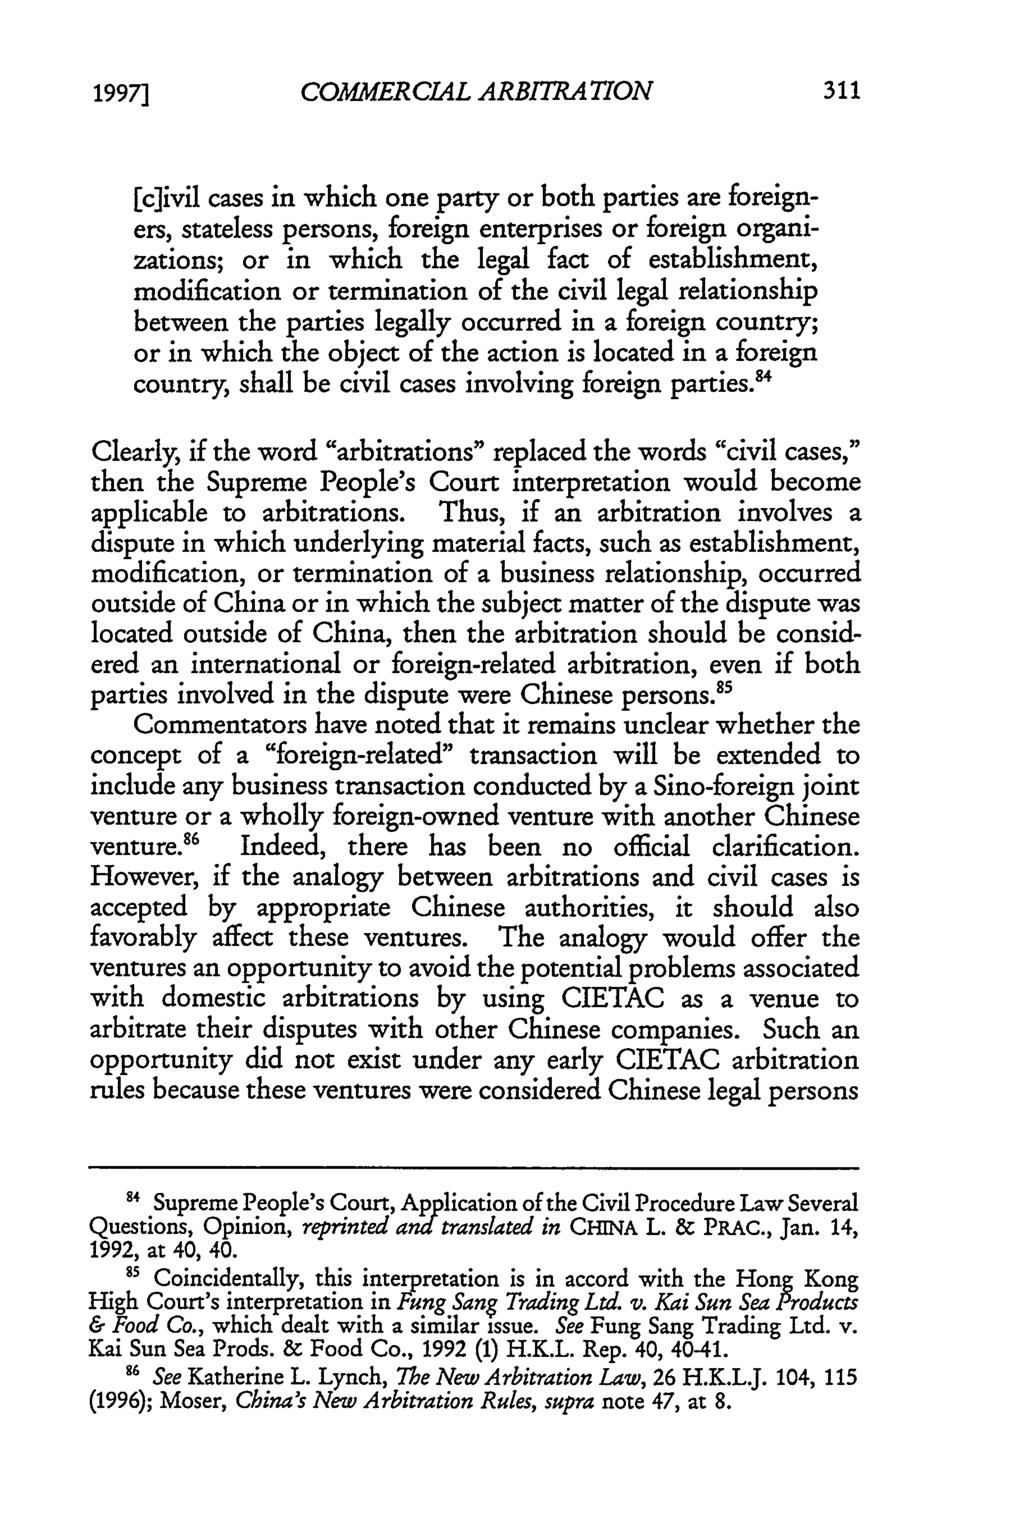 Fishburne and Lian: Commercial Arbitration in Hong Kong and China: A Comparative Anal 1997] COMMERCIAL ARBITRATION [c]ivil cases in which one party or both parties are foreigners, stateless persons,